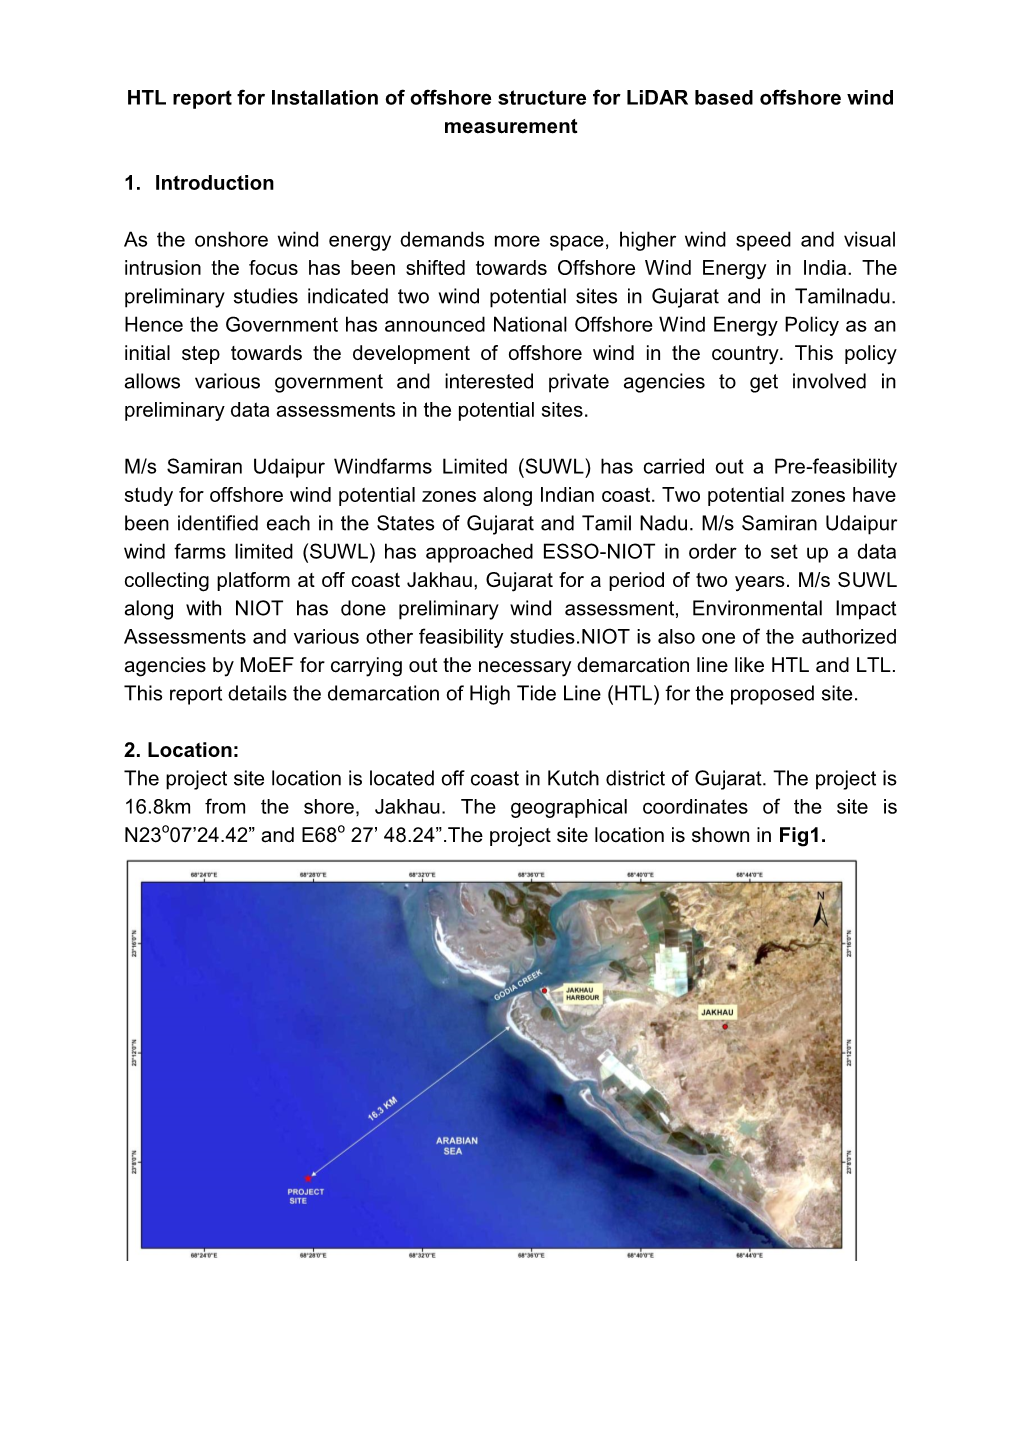 HTL Report for Installation of Offshore Structure for Lidar Based Offshore Wind Measurement 1. Introduction As the Onshore Wind